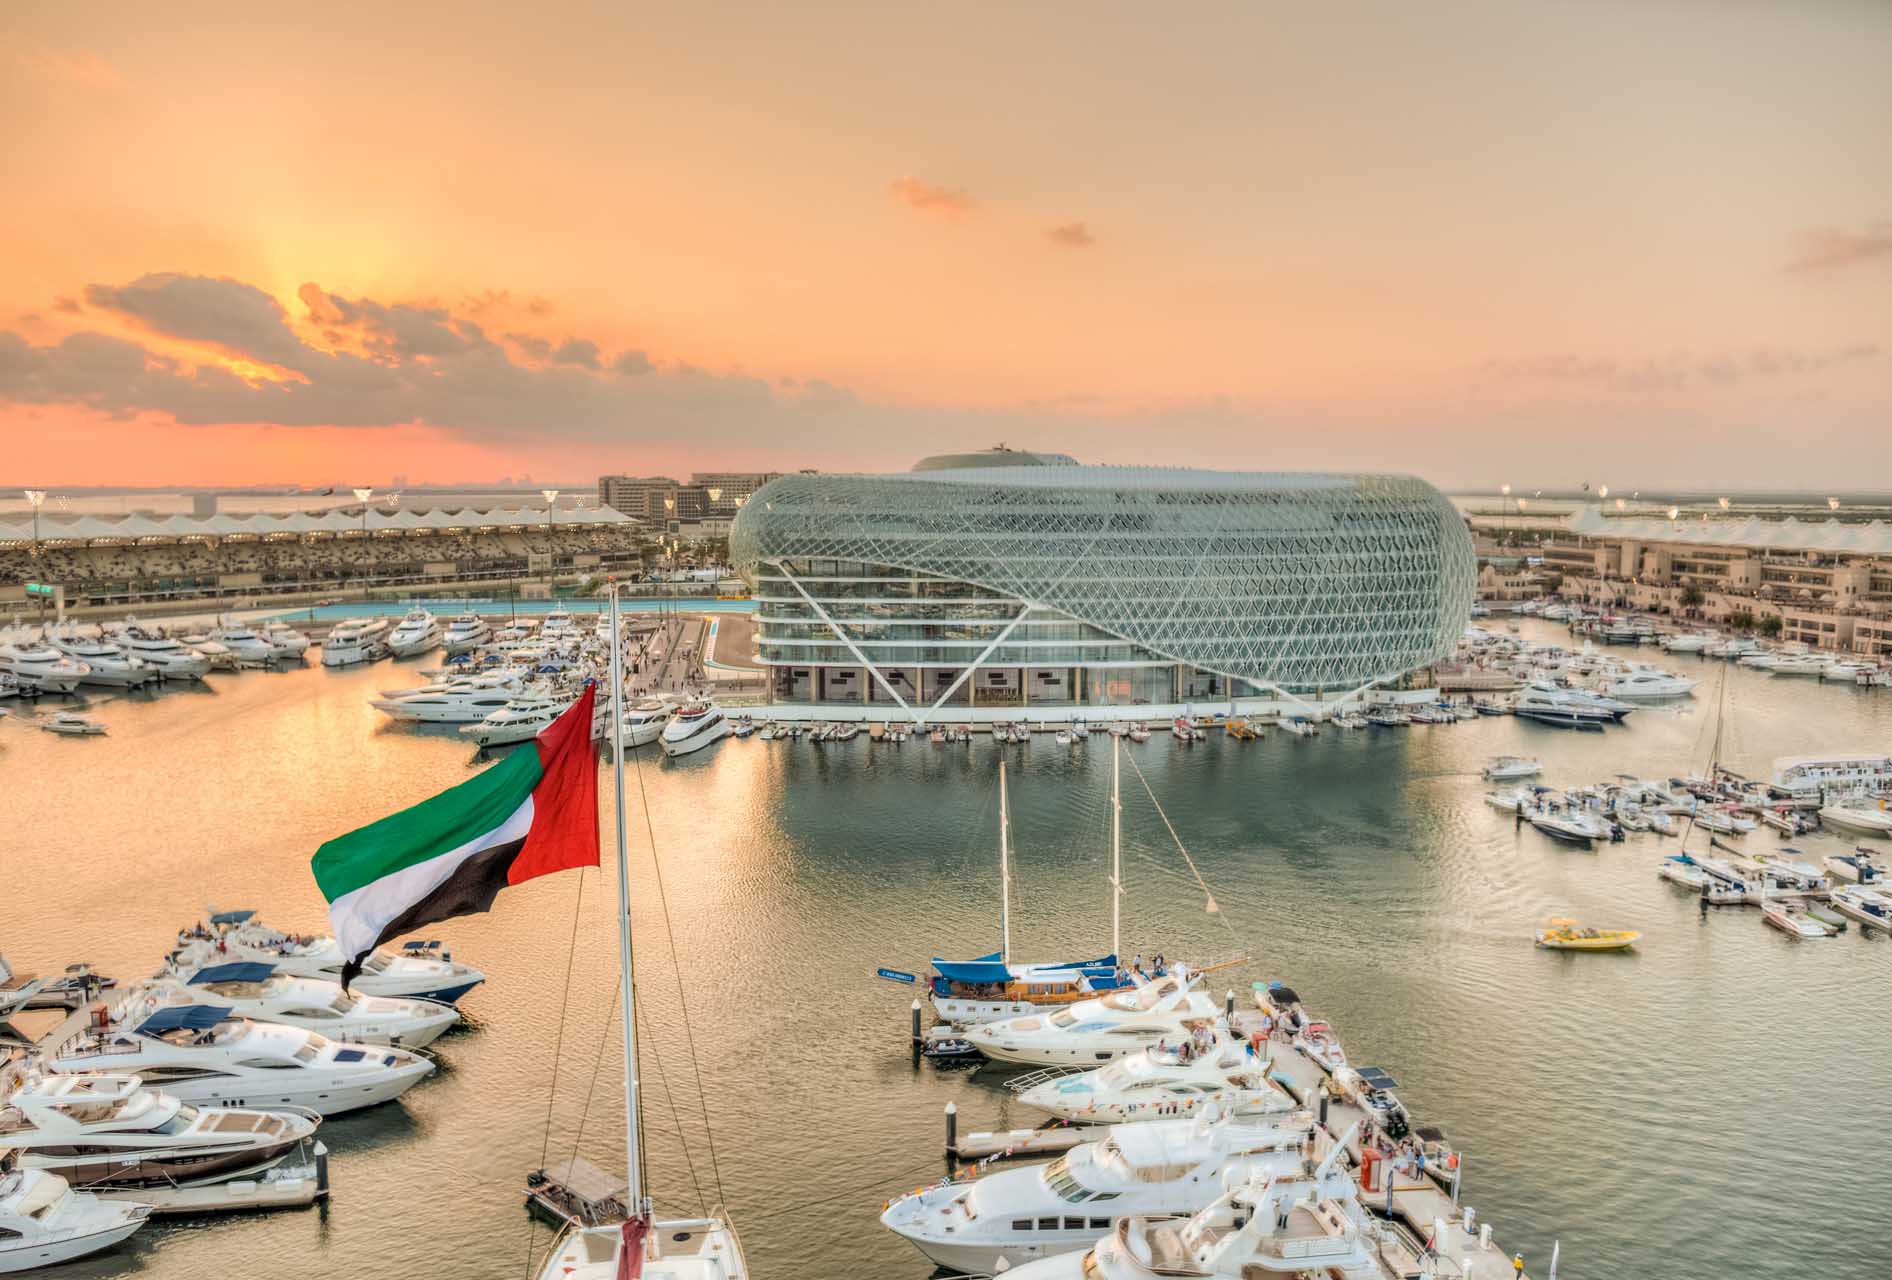 Yas Marina is gearing up to offer Race Week revellers an unrivalled atmosphere and world-class live entertainment from 17th – 20th November.